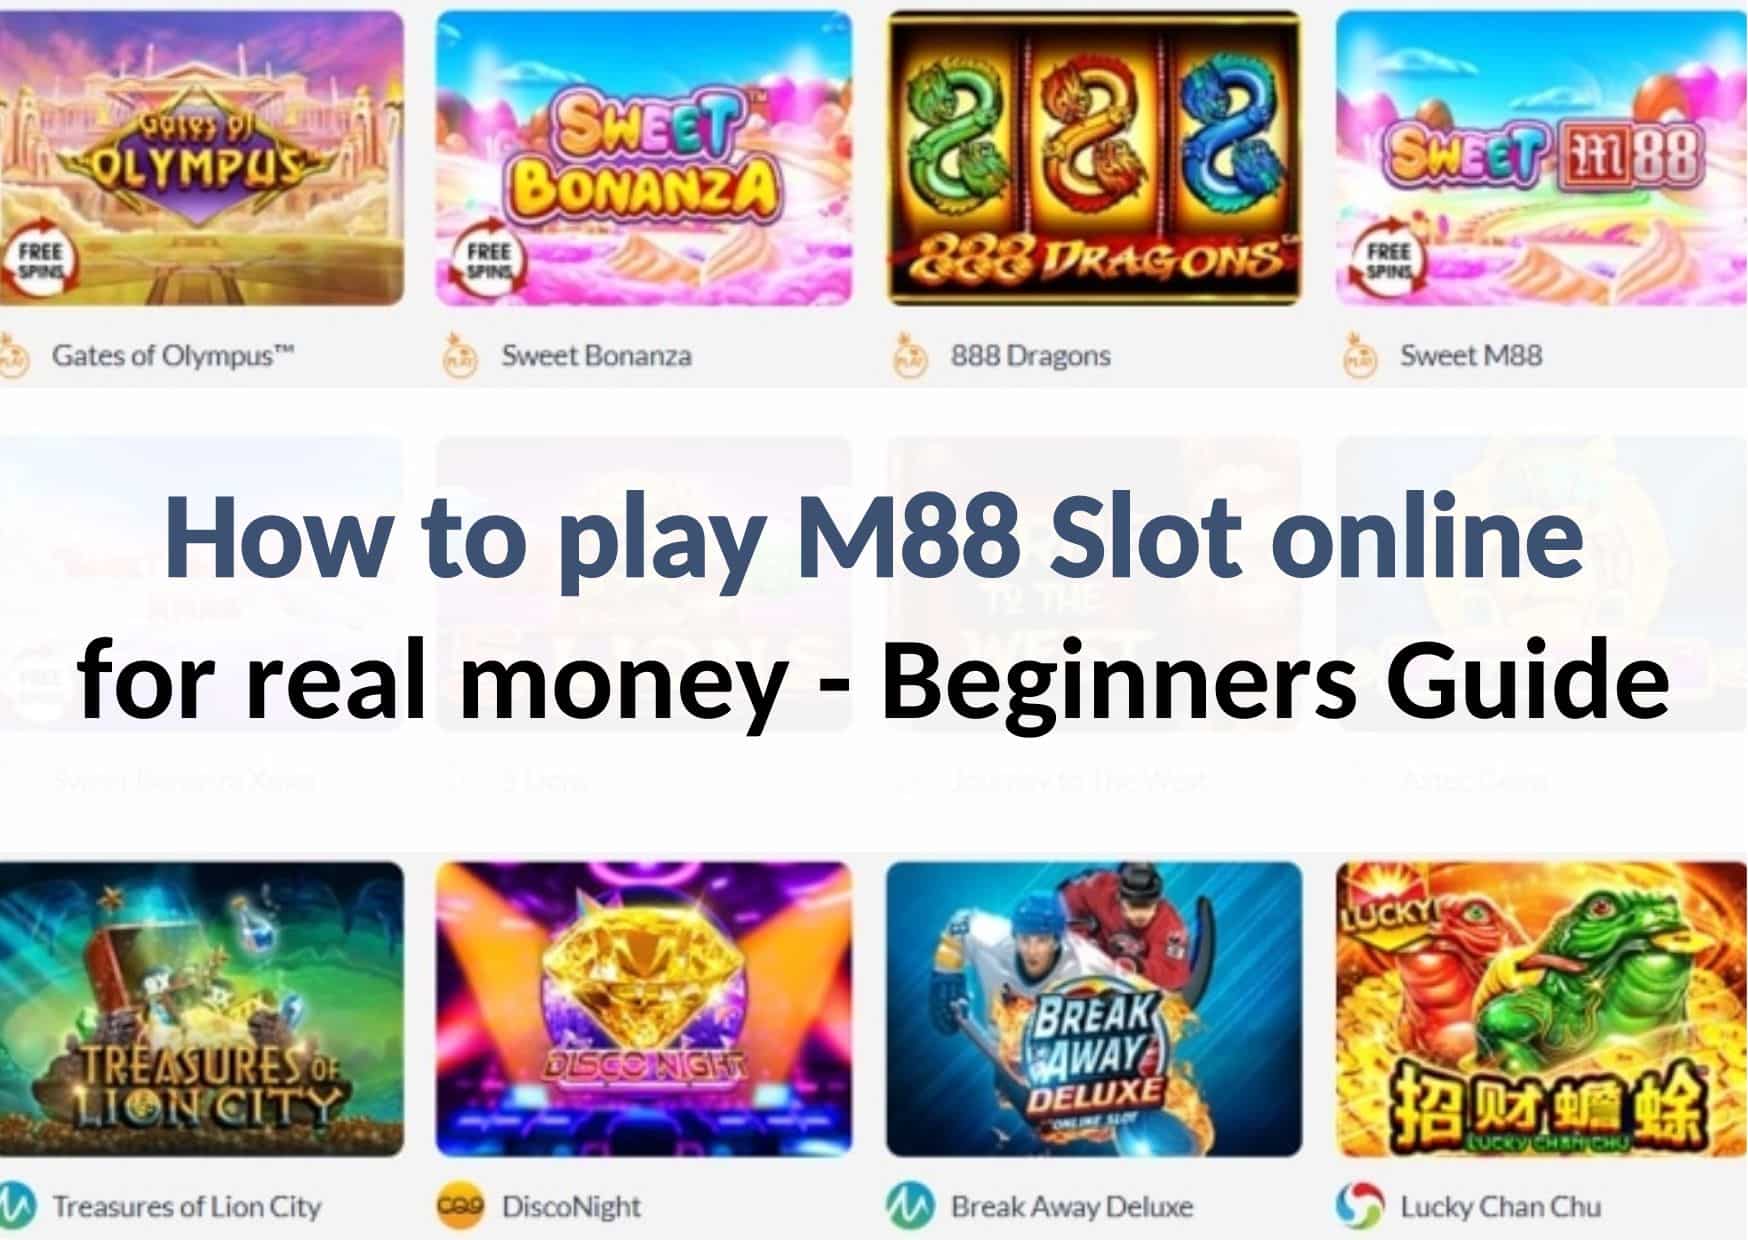 m88 slots machine games online tutorial guide how to play